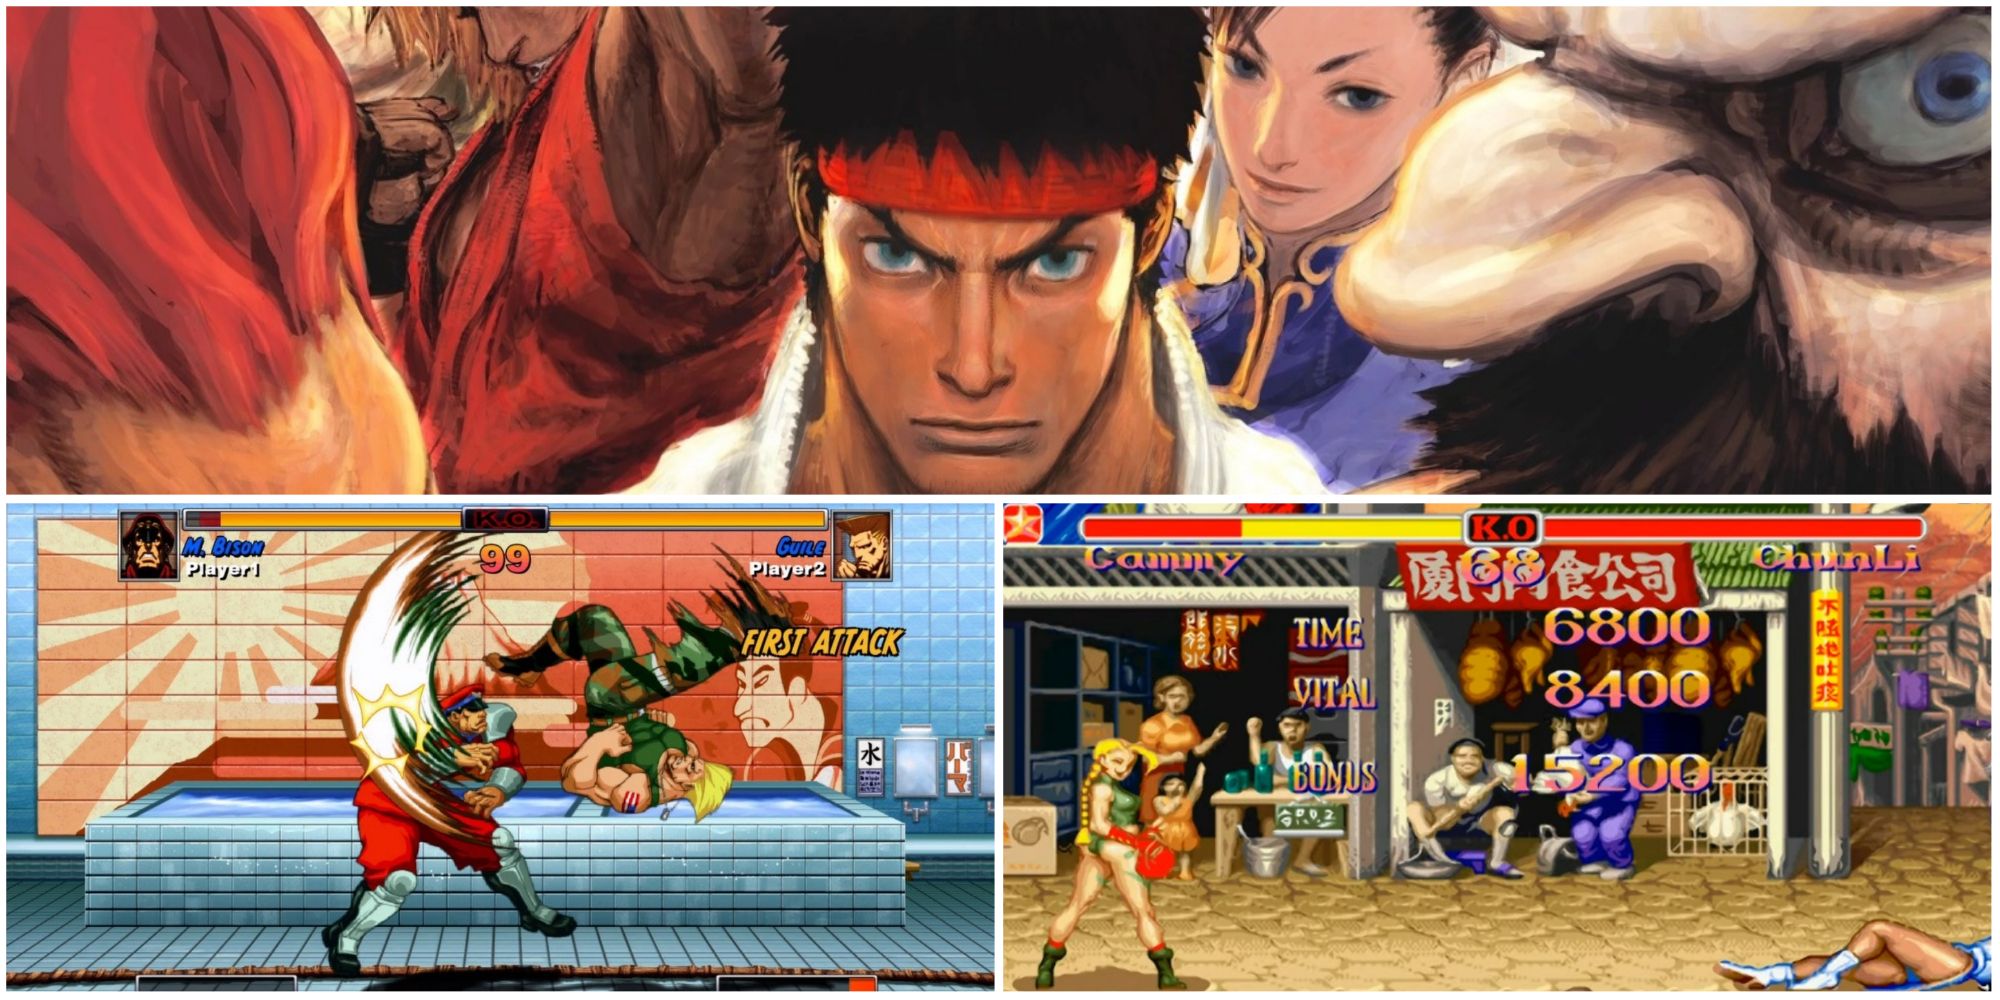 Every Street Fighter Game Ranked From Worst to Best